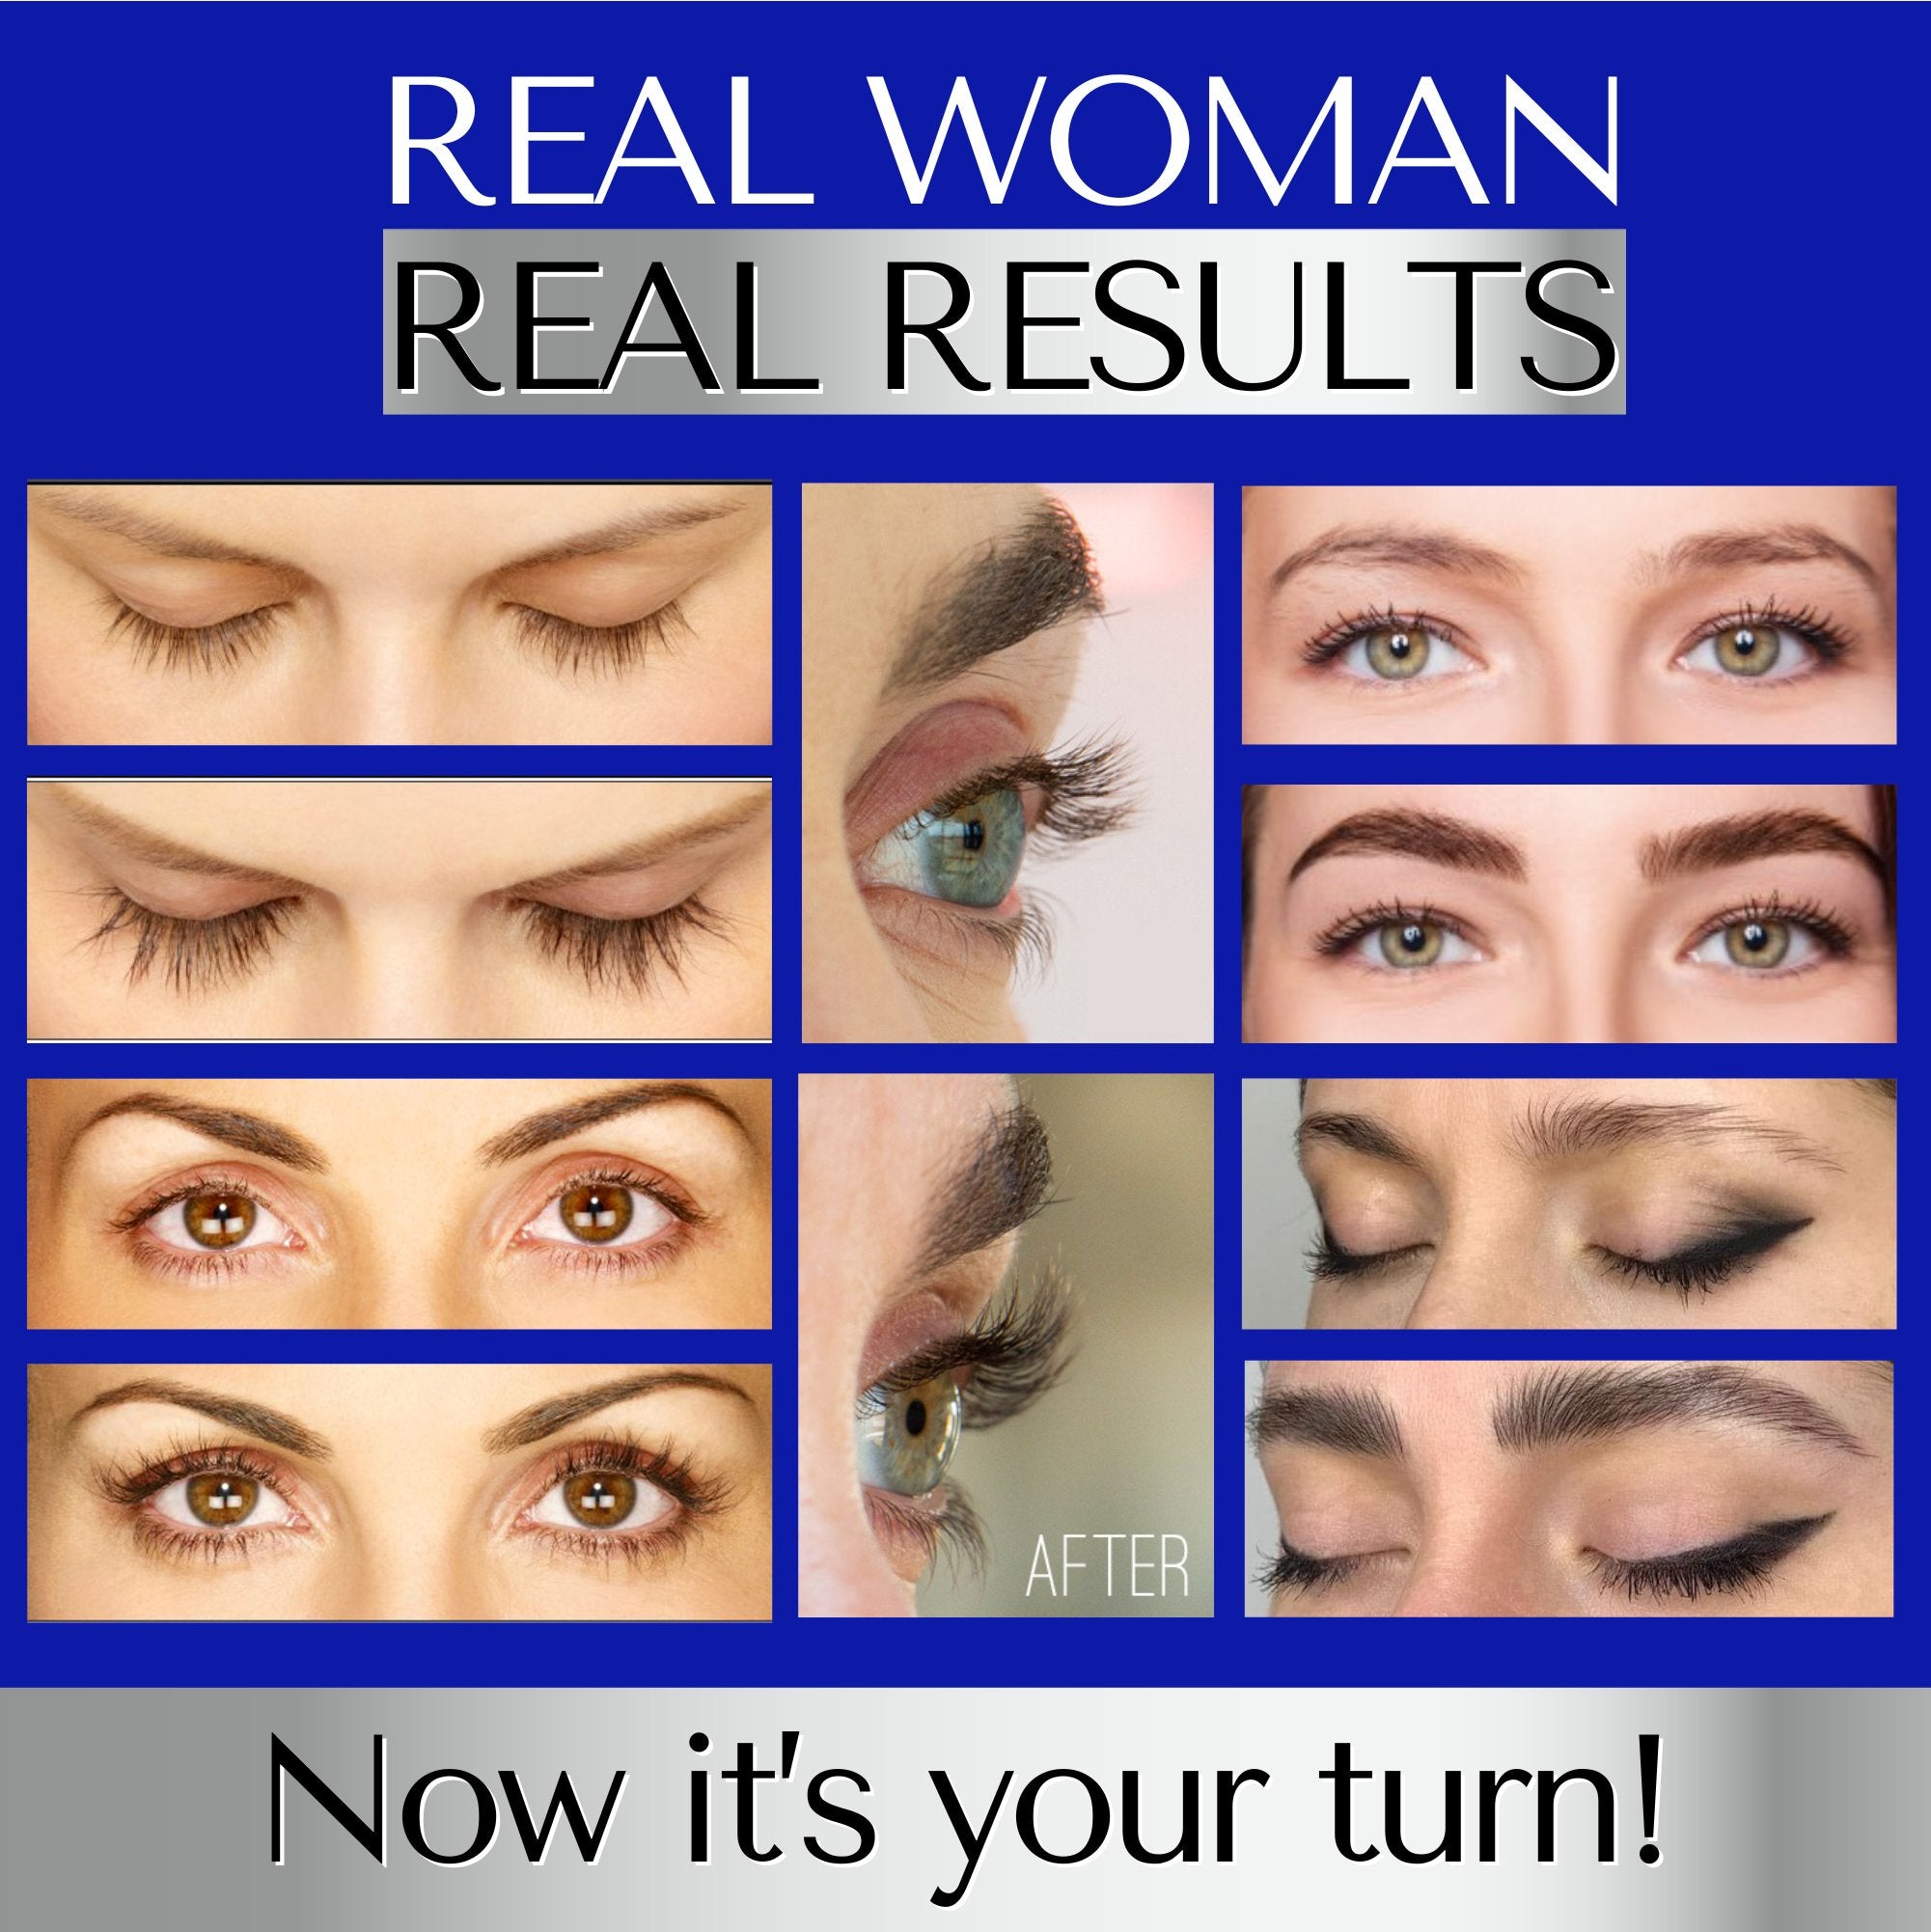 Real women, real results, before and after treatment, eyelashes and eyebrows look fuller and thicker. 